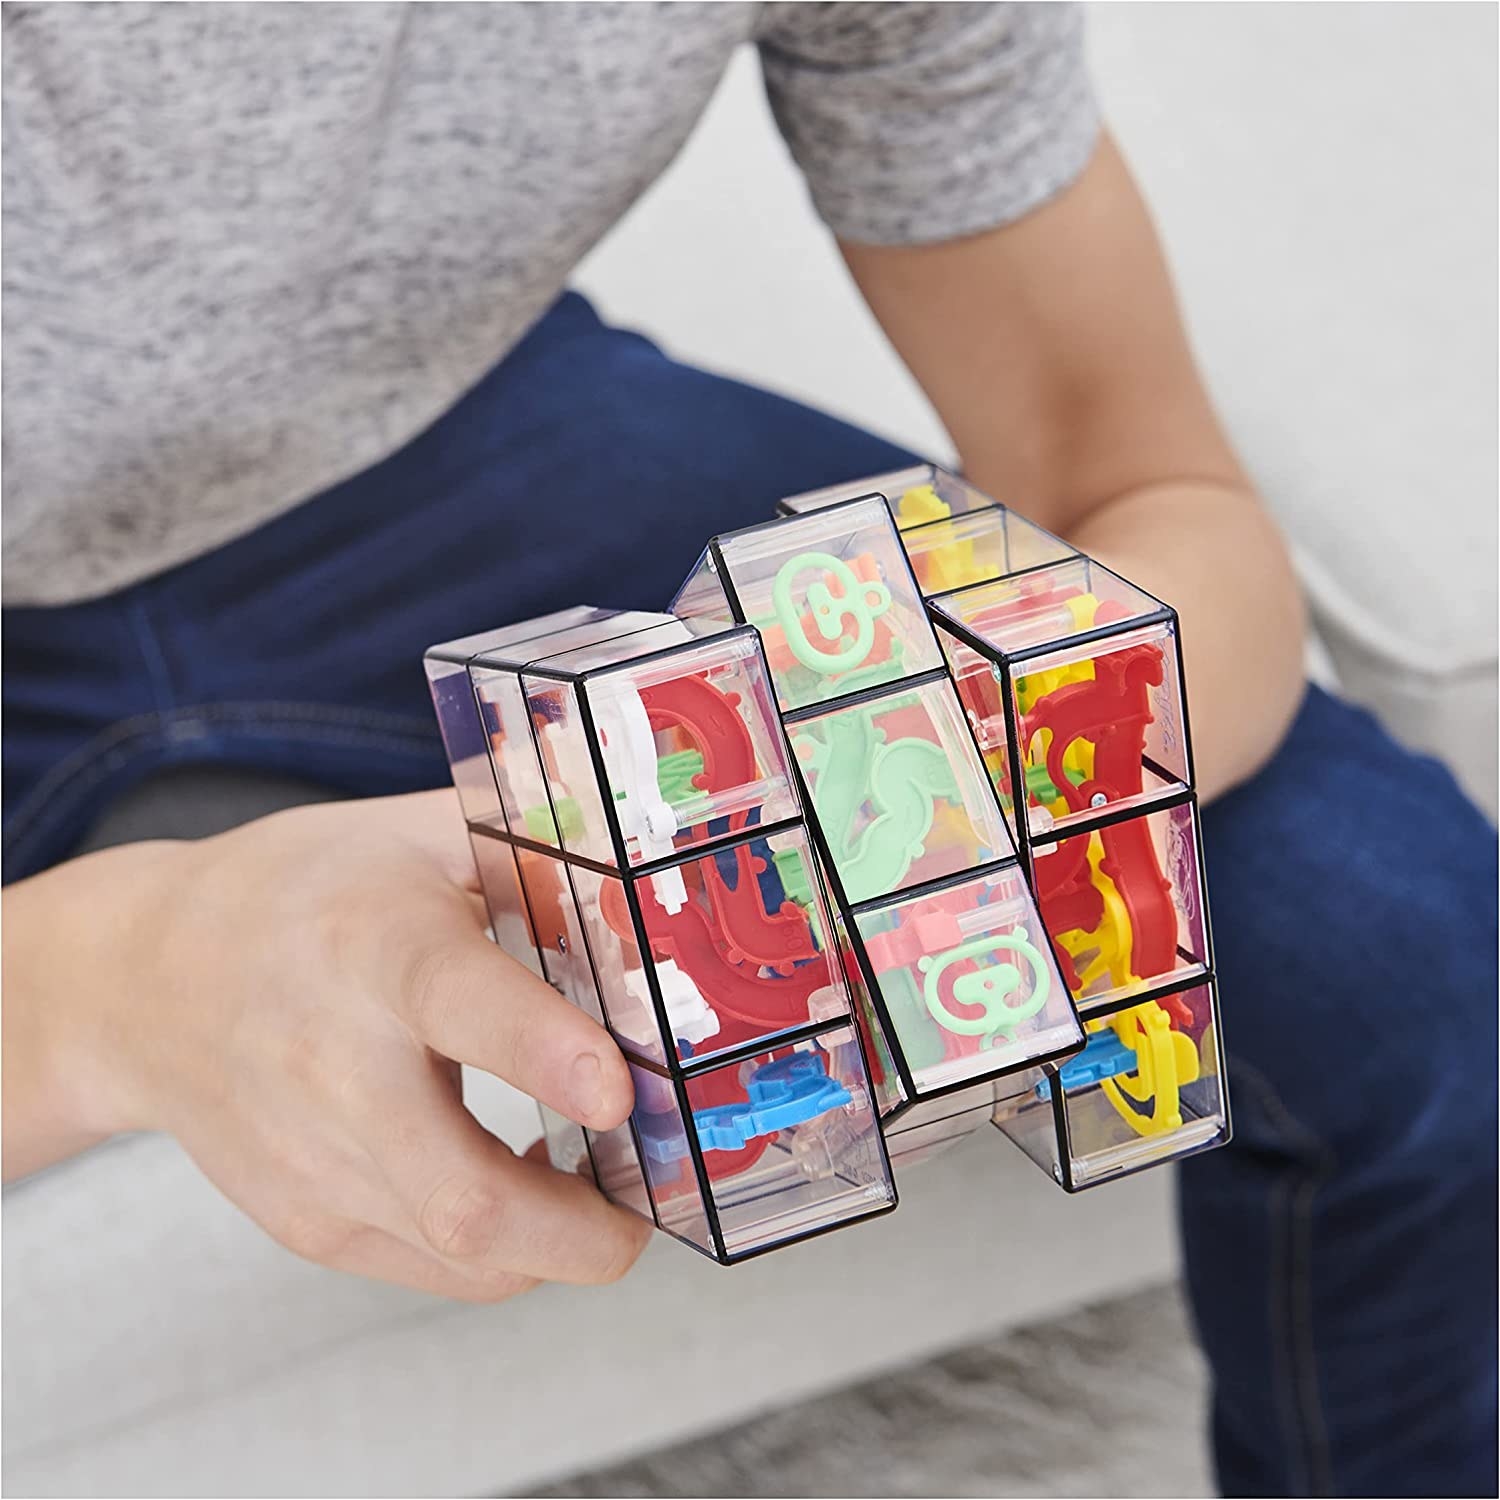 Model&#x27;s hands playing with clear Rubik&#x27;s Cube-like toy with colorful mazes inside